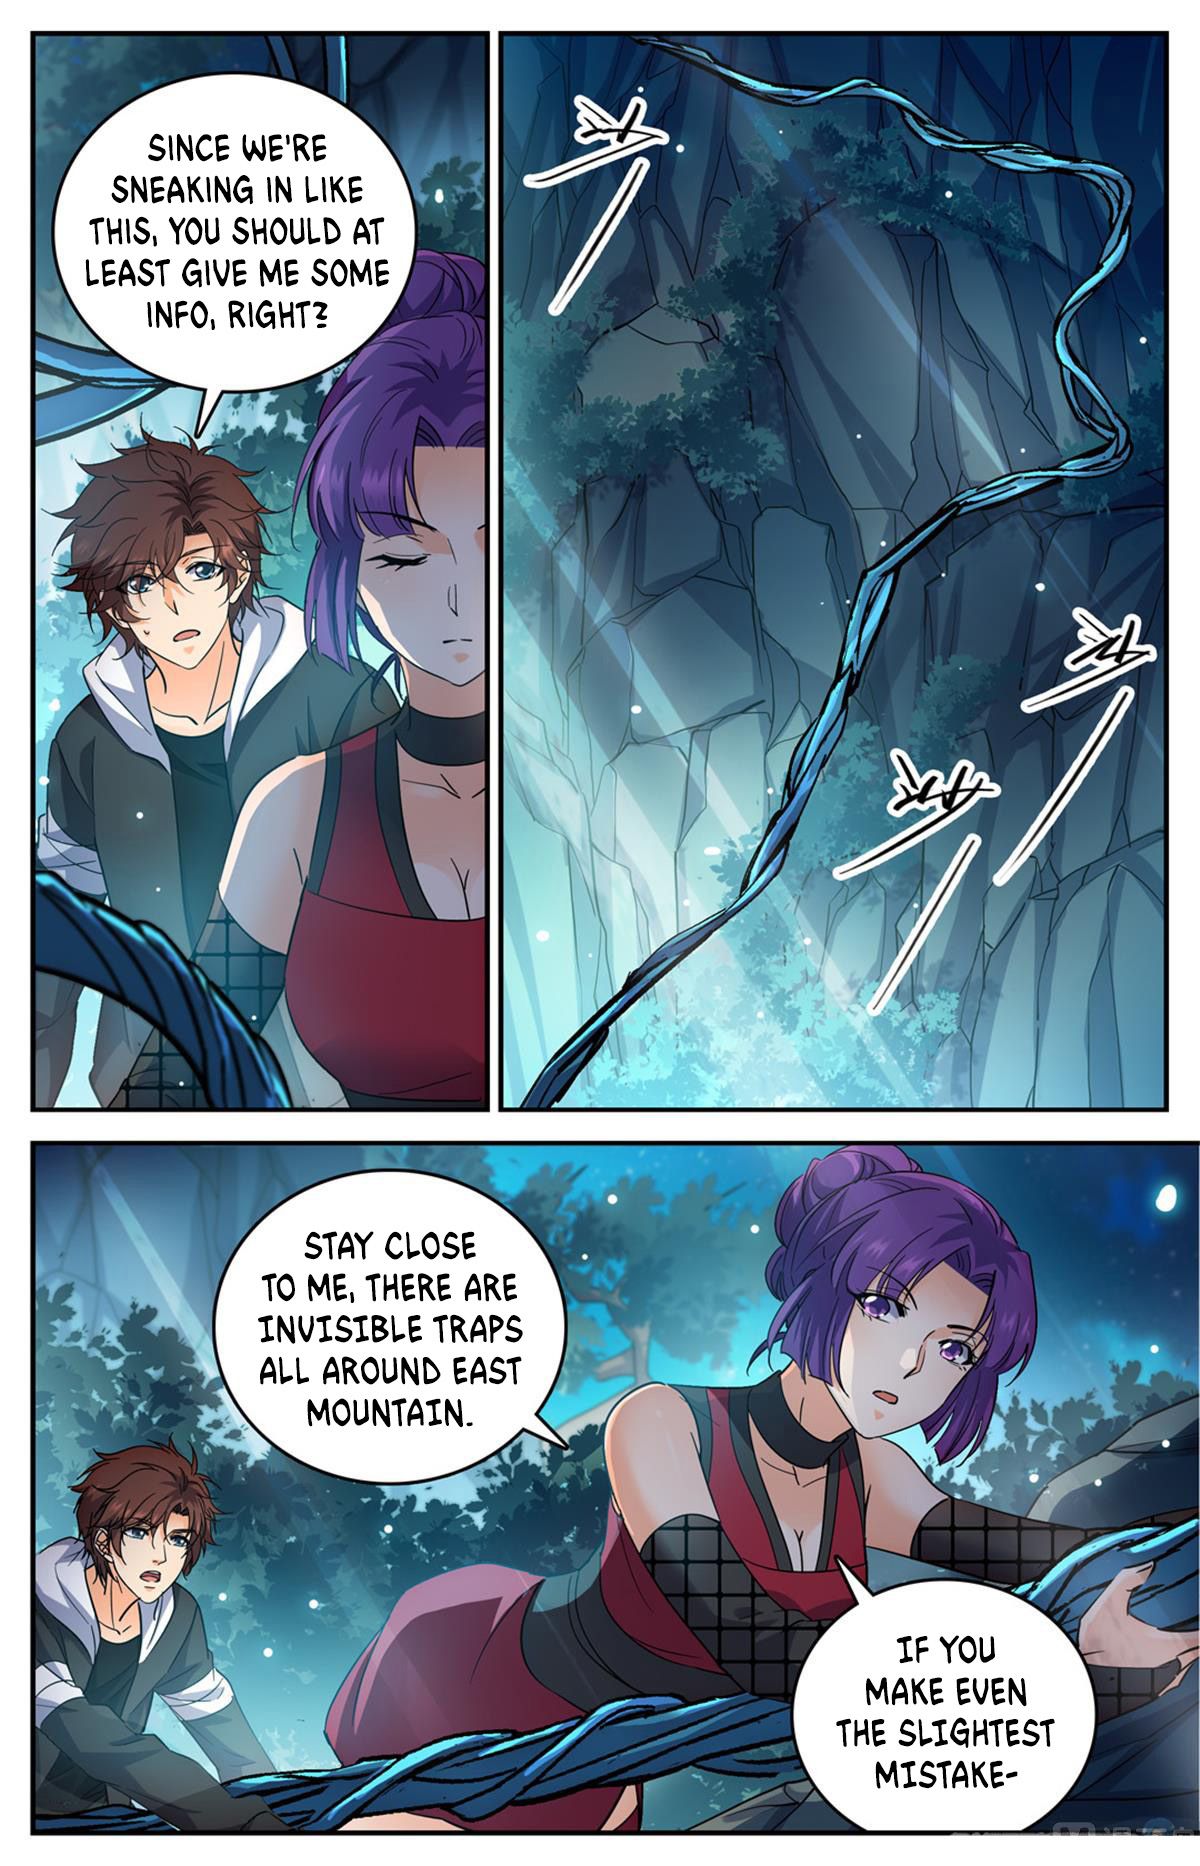 Versatile Mage chapter 500 page 9